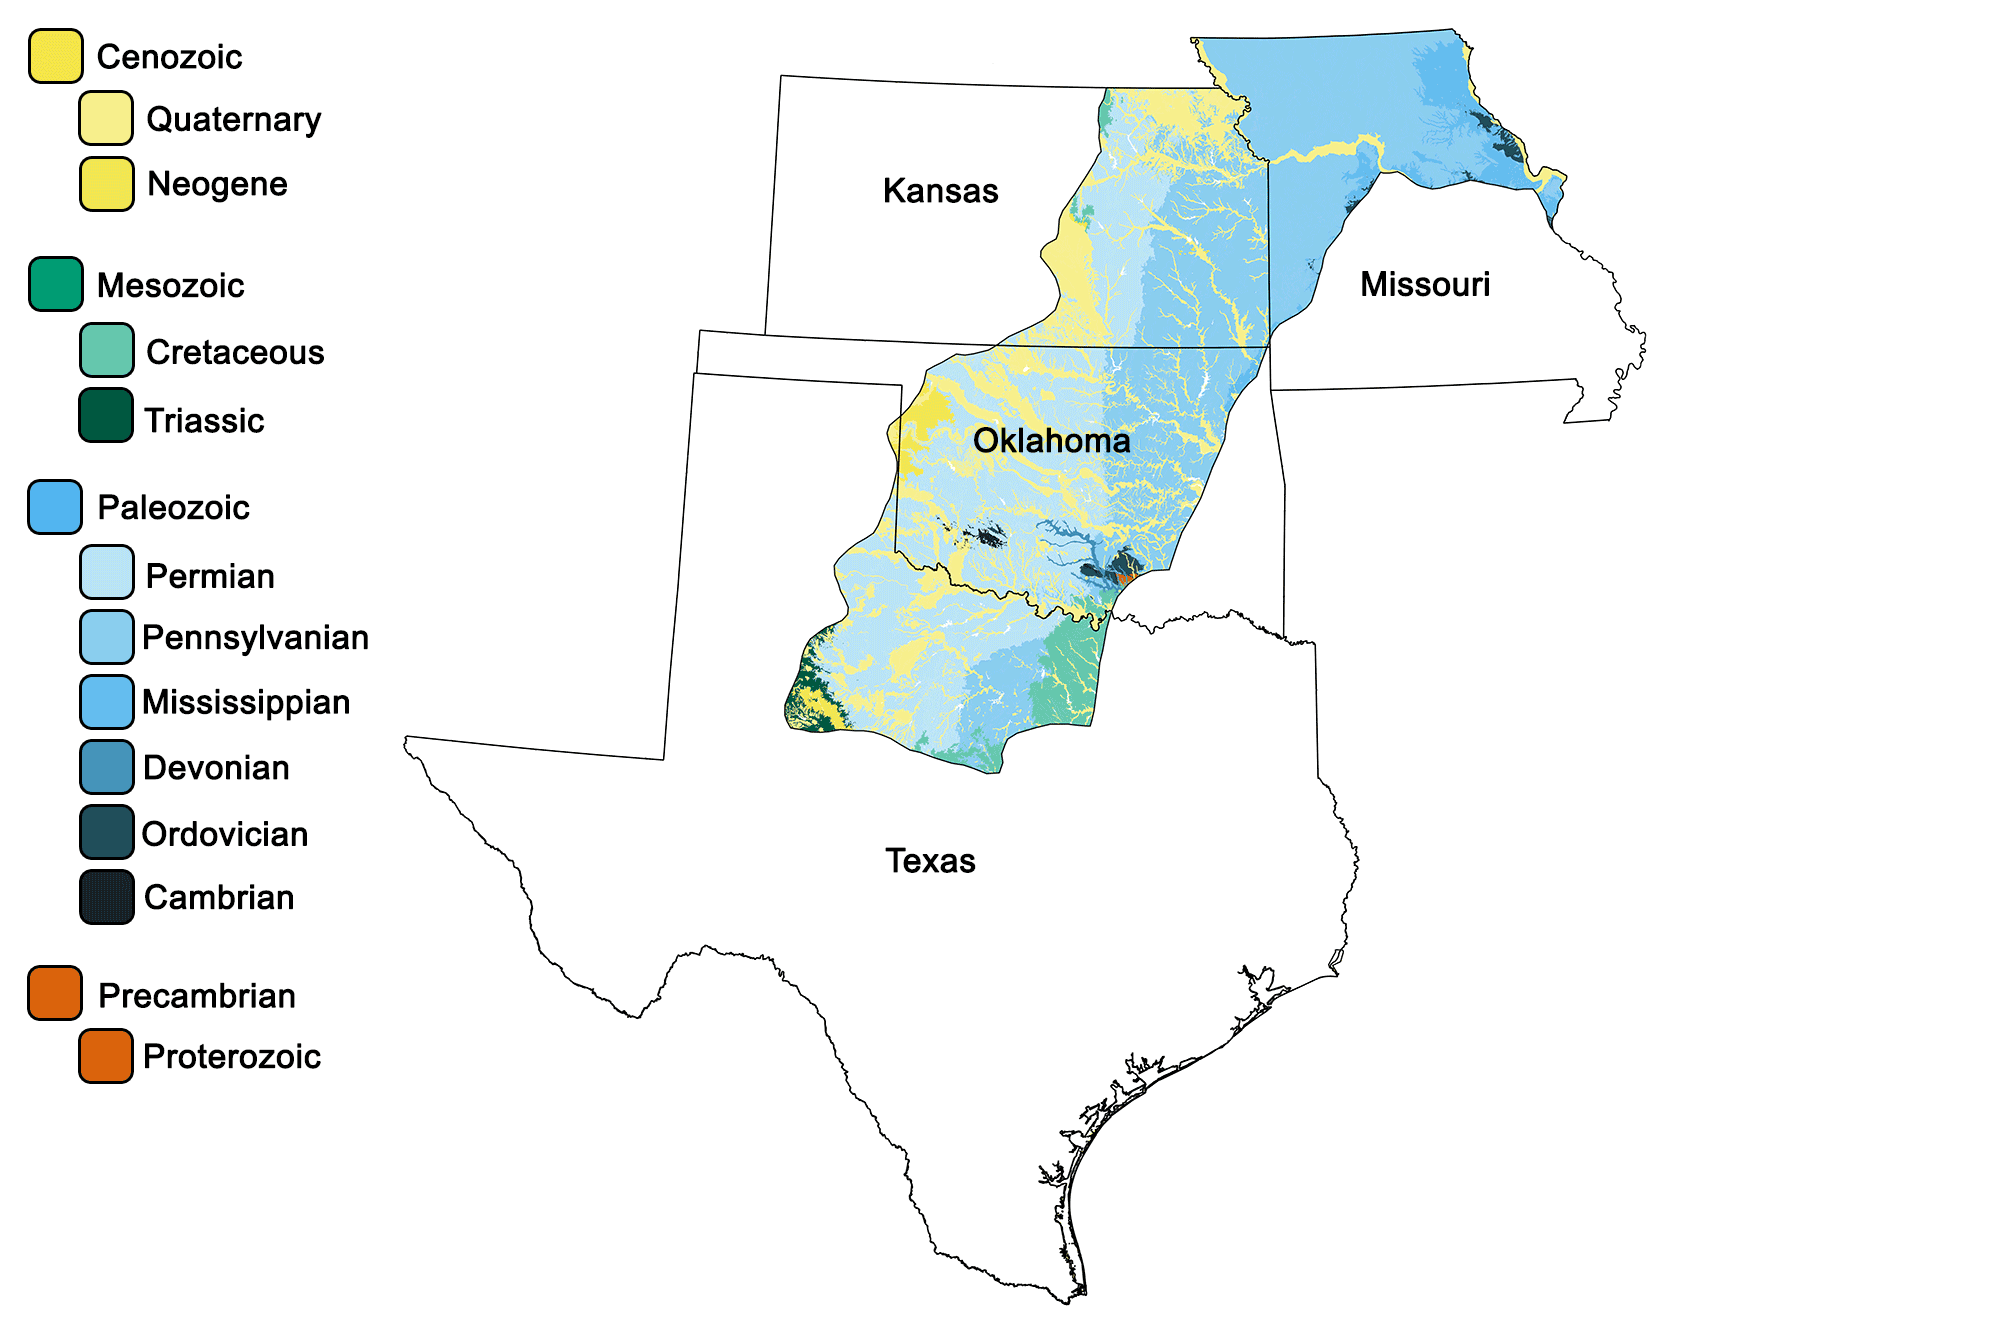 Geologic map of the Central Lowland region of the South-Central United States.